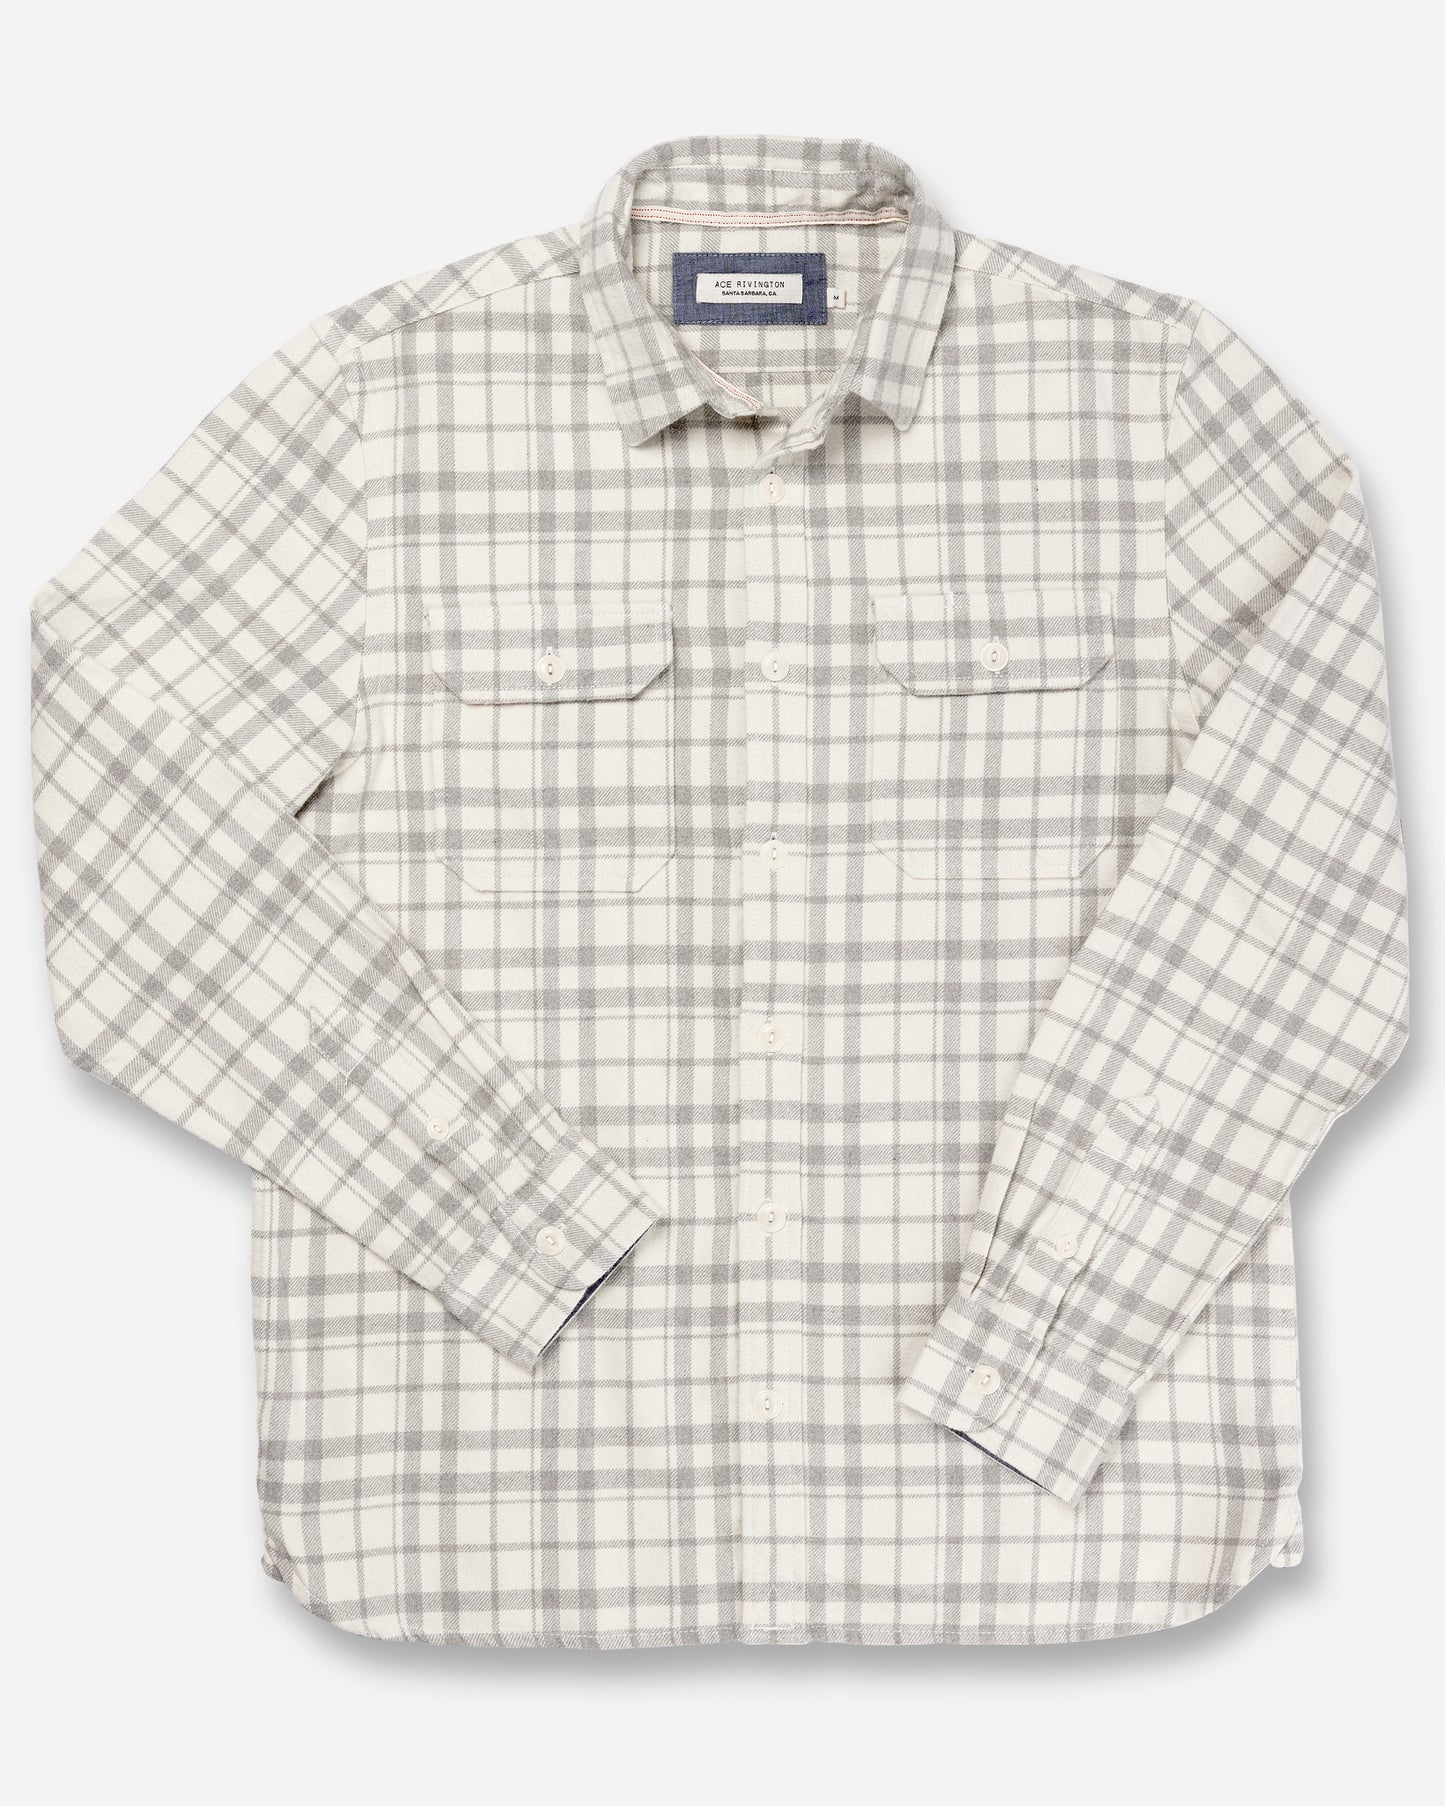 front of men's off white and grey winter flannel shirt with overlaid arms